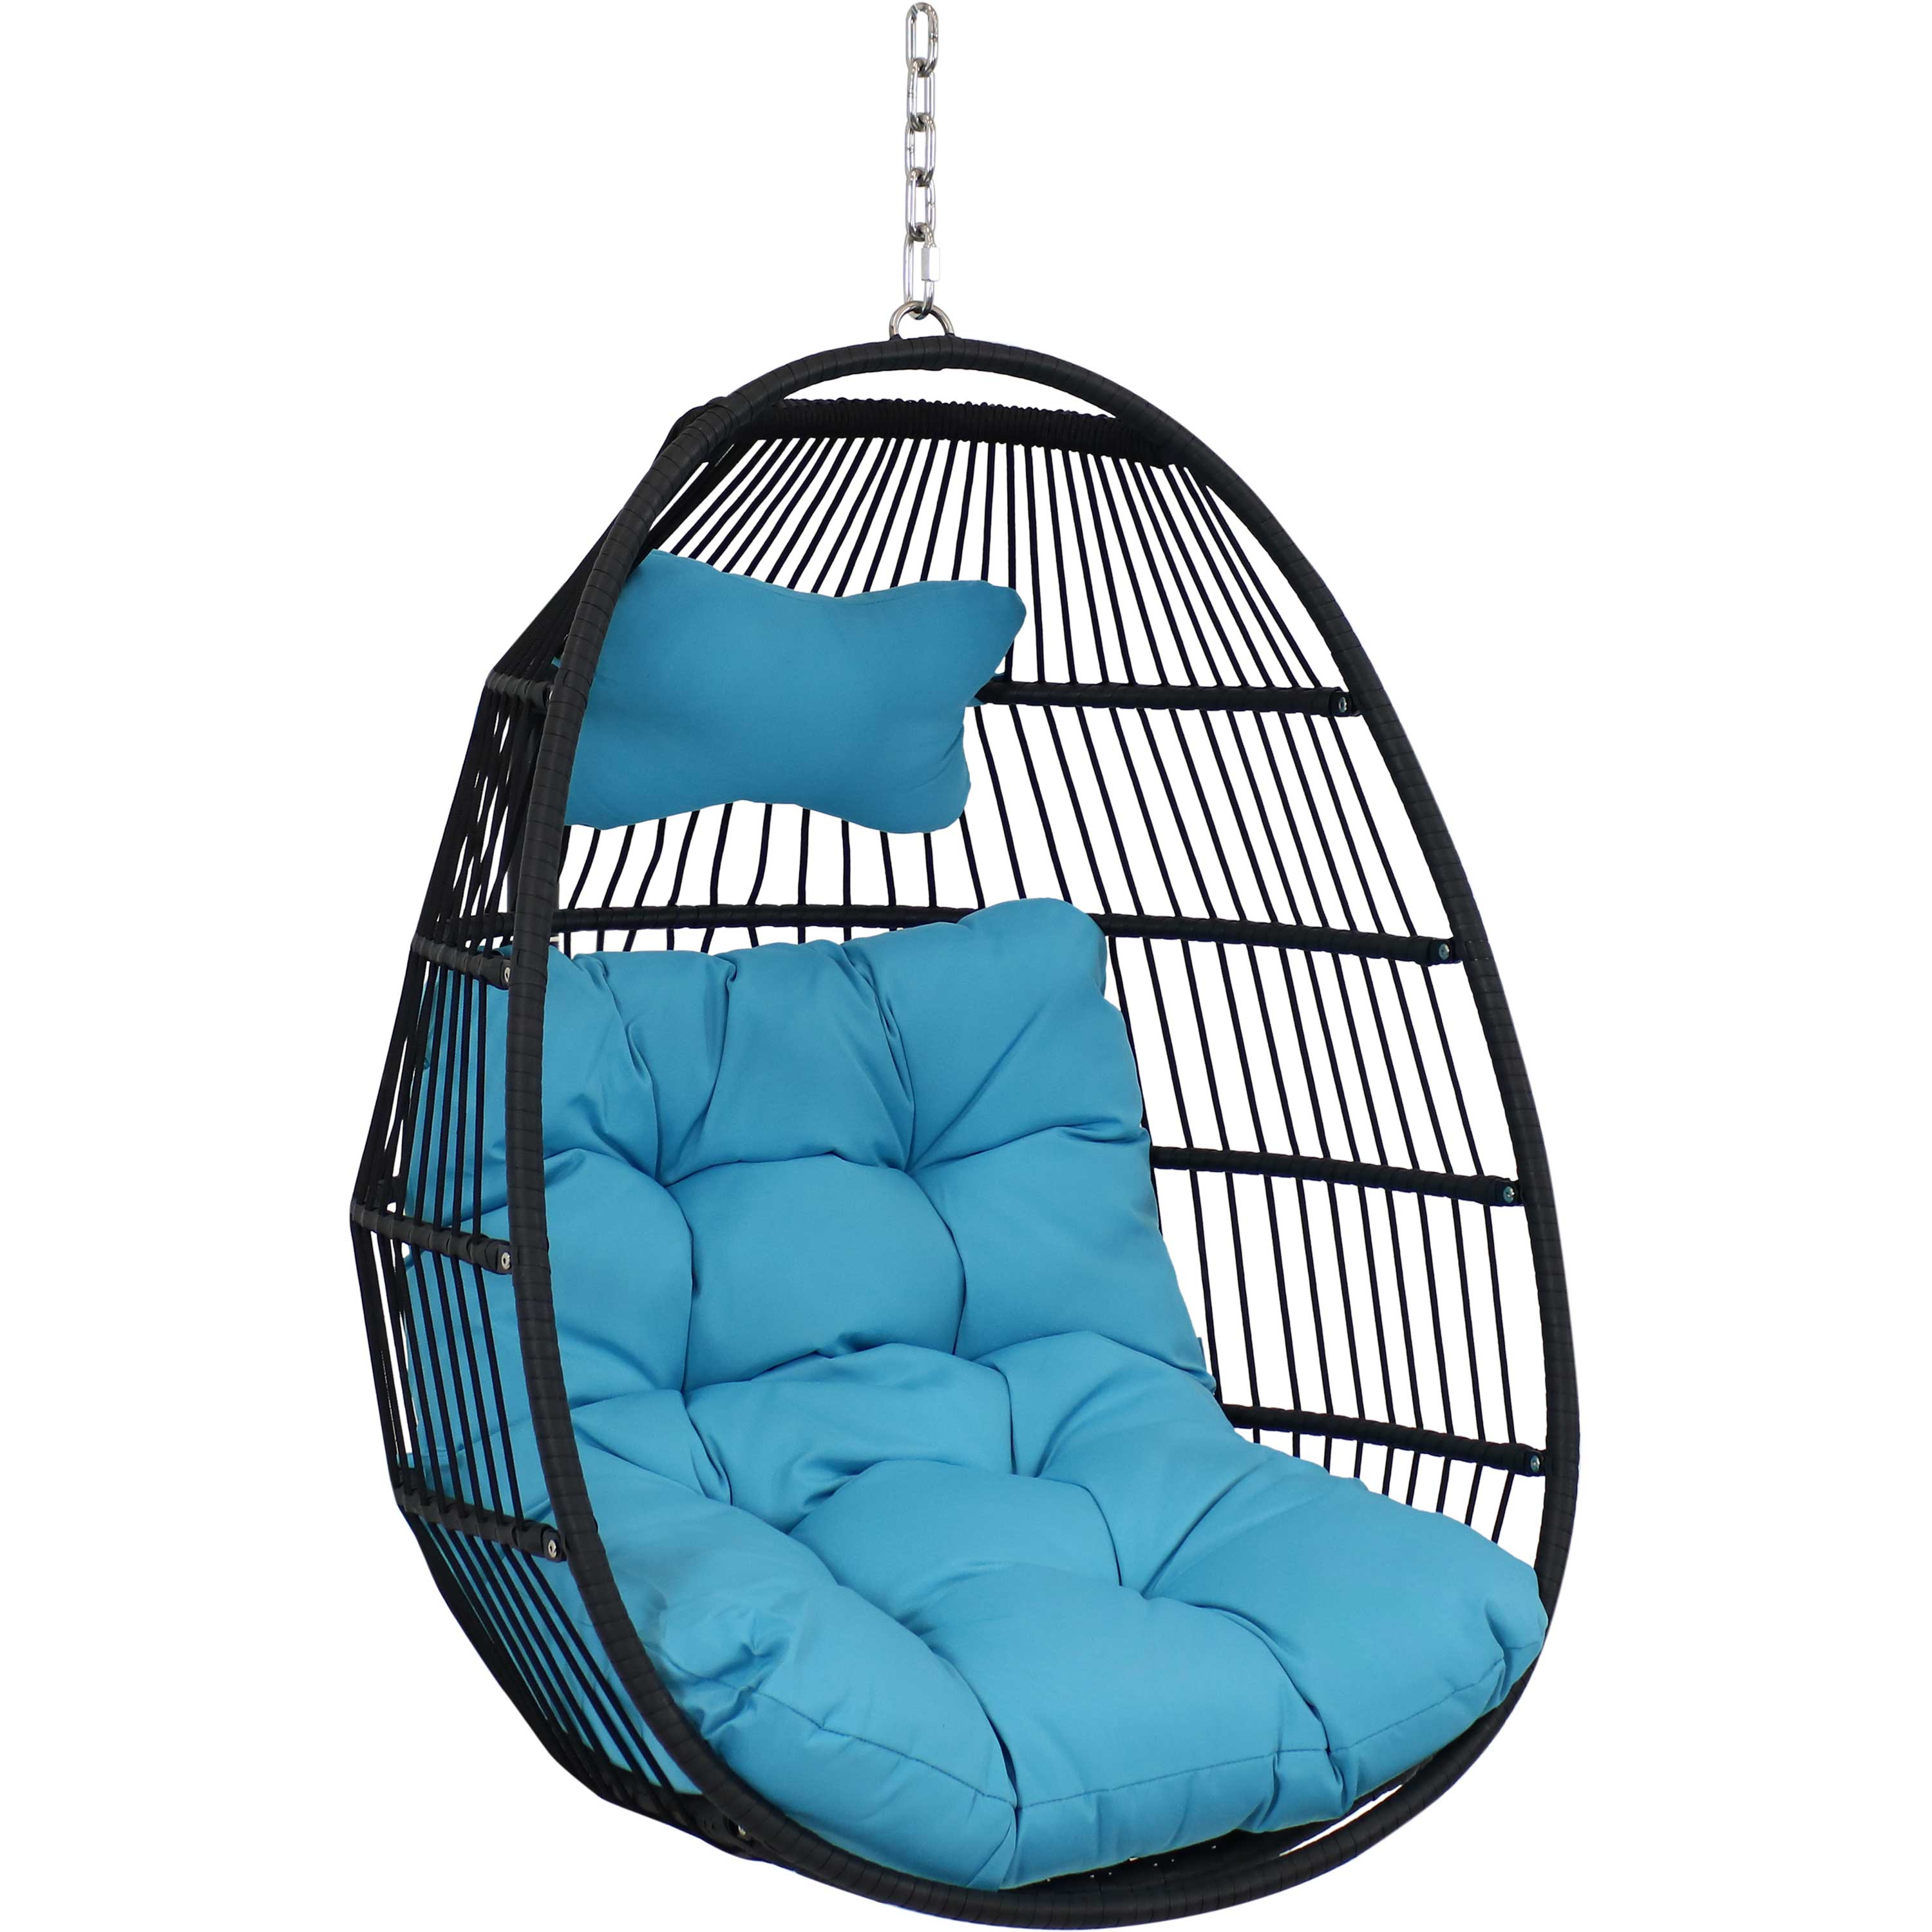 Sunnydaze Julia Hanging Egg Chair with Blue Cushions - 44-Inch